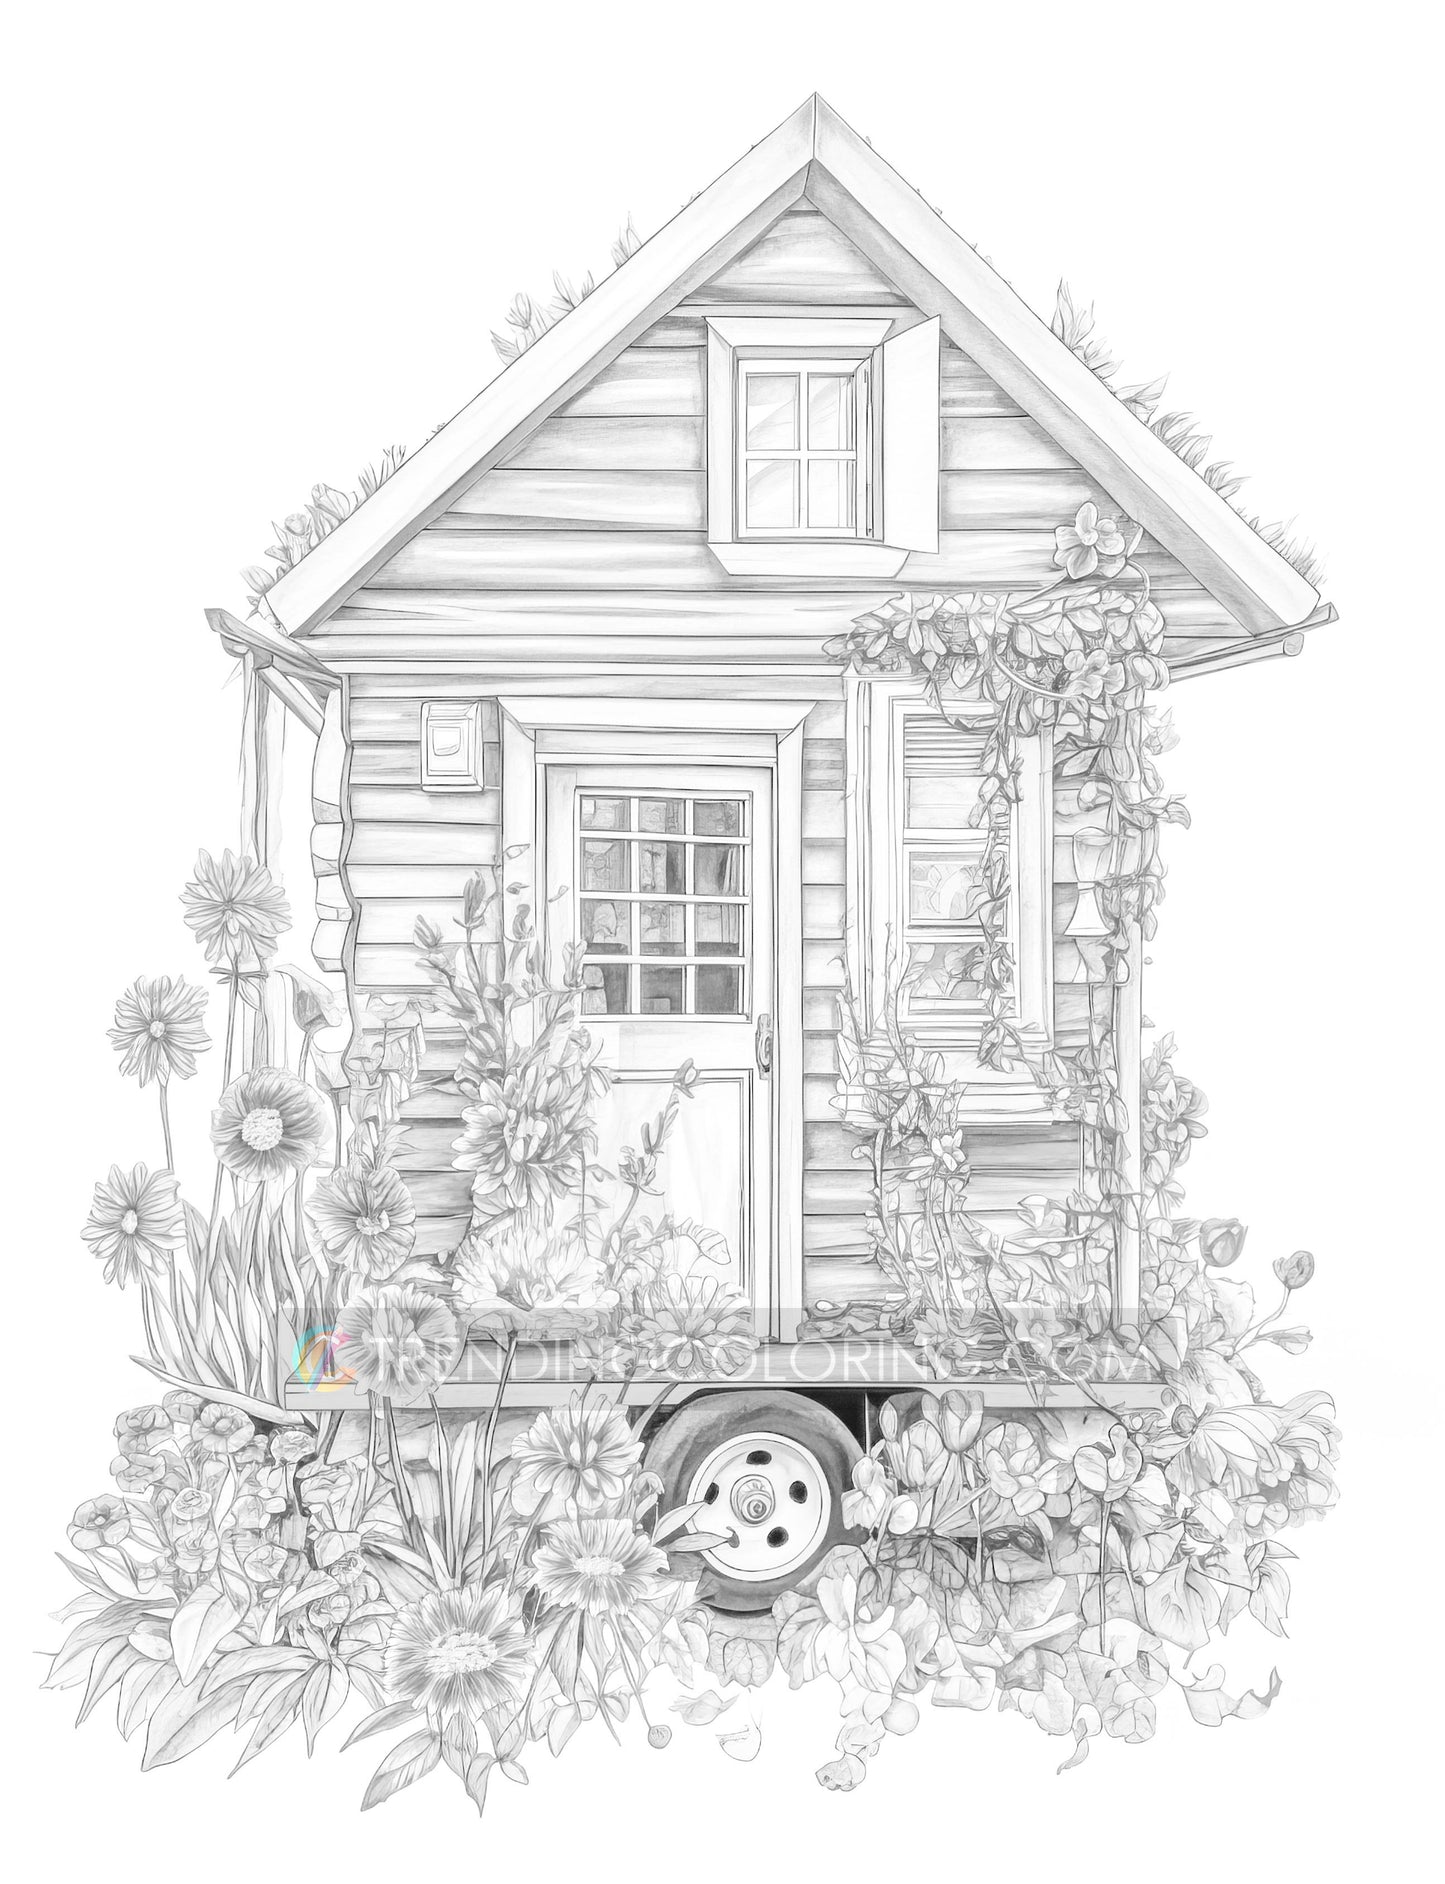 25 Adorable Mini Houses Grayscale Coloring Pages - Instant Download - Printable